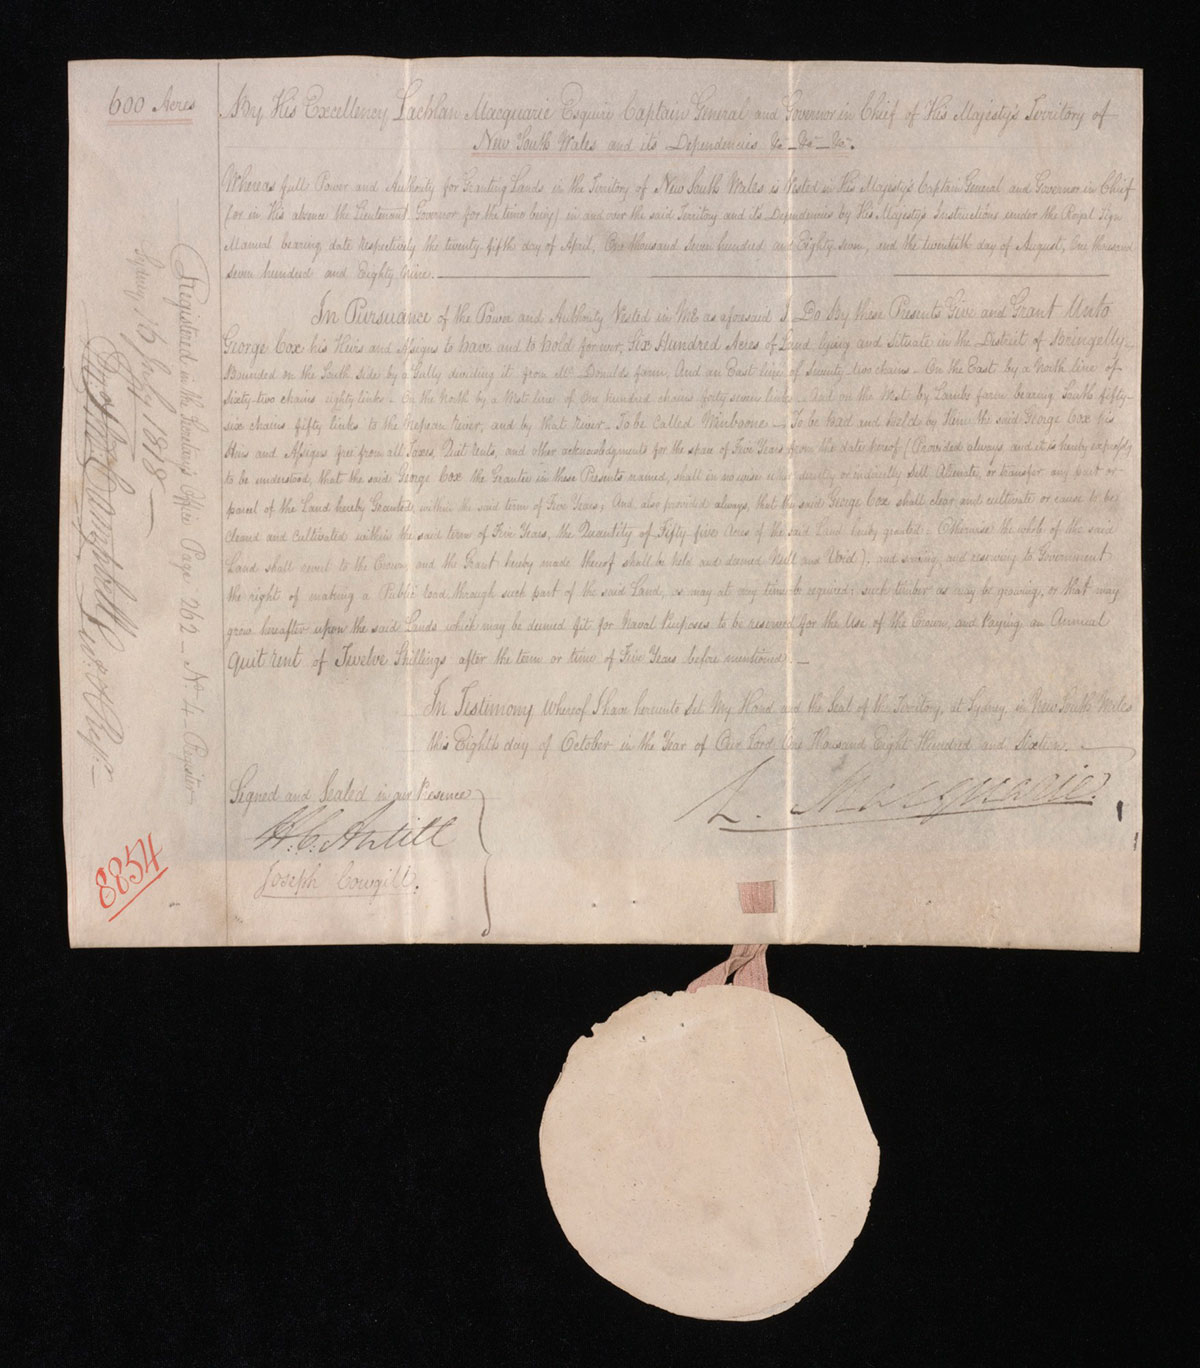 A handwritten white coloured vellum that reads 'By His Exellency Lachlan Macquarie ...'. A round shaped seal hangs freely from the bottom, attached by a beige coloured ribbon.